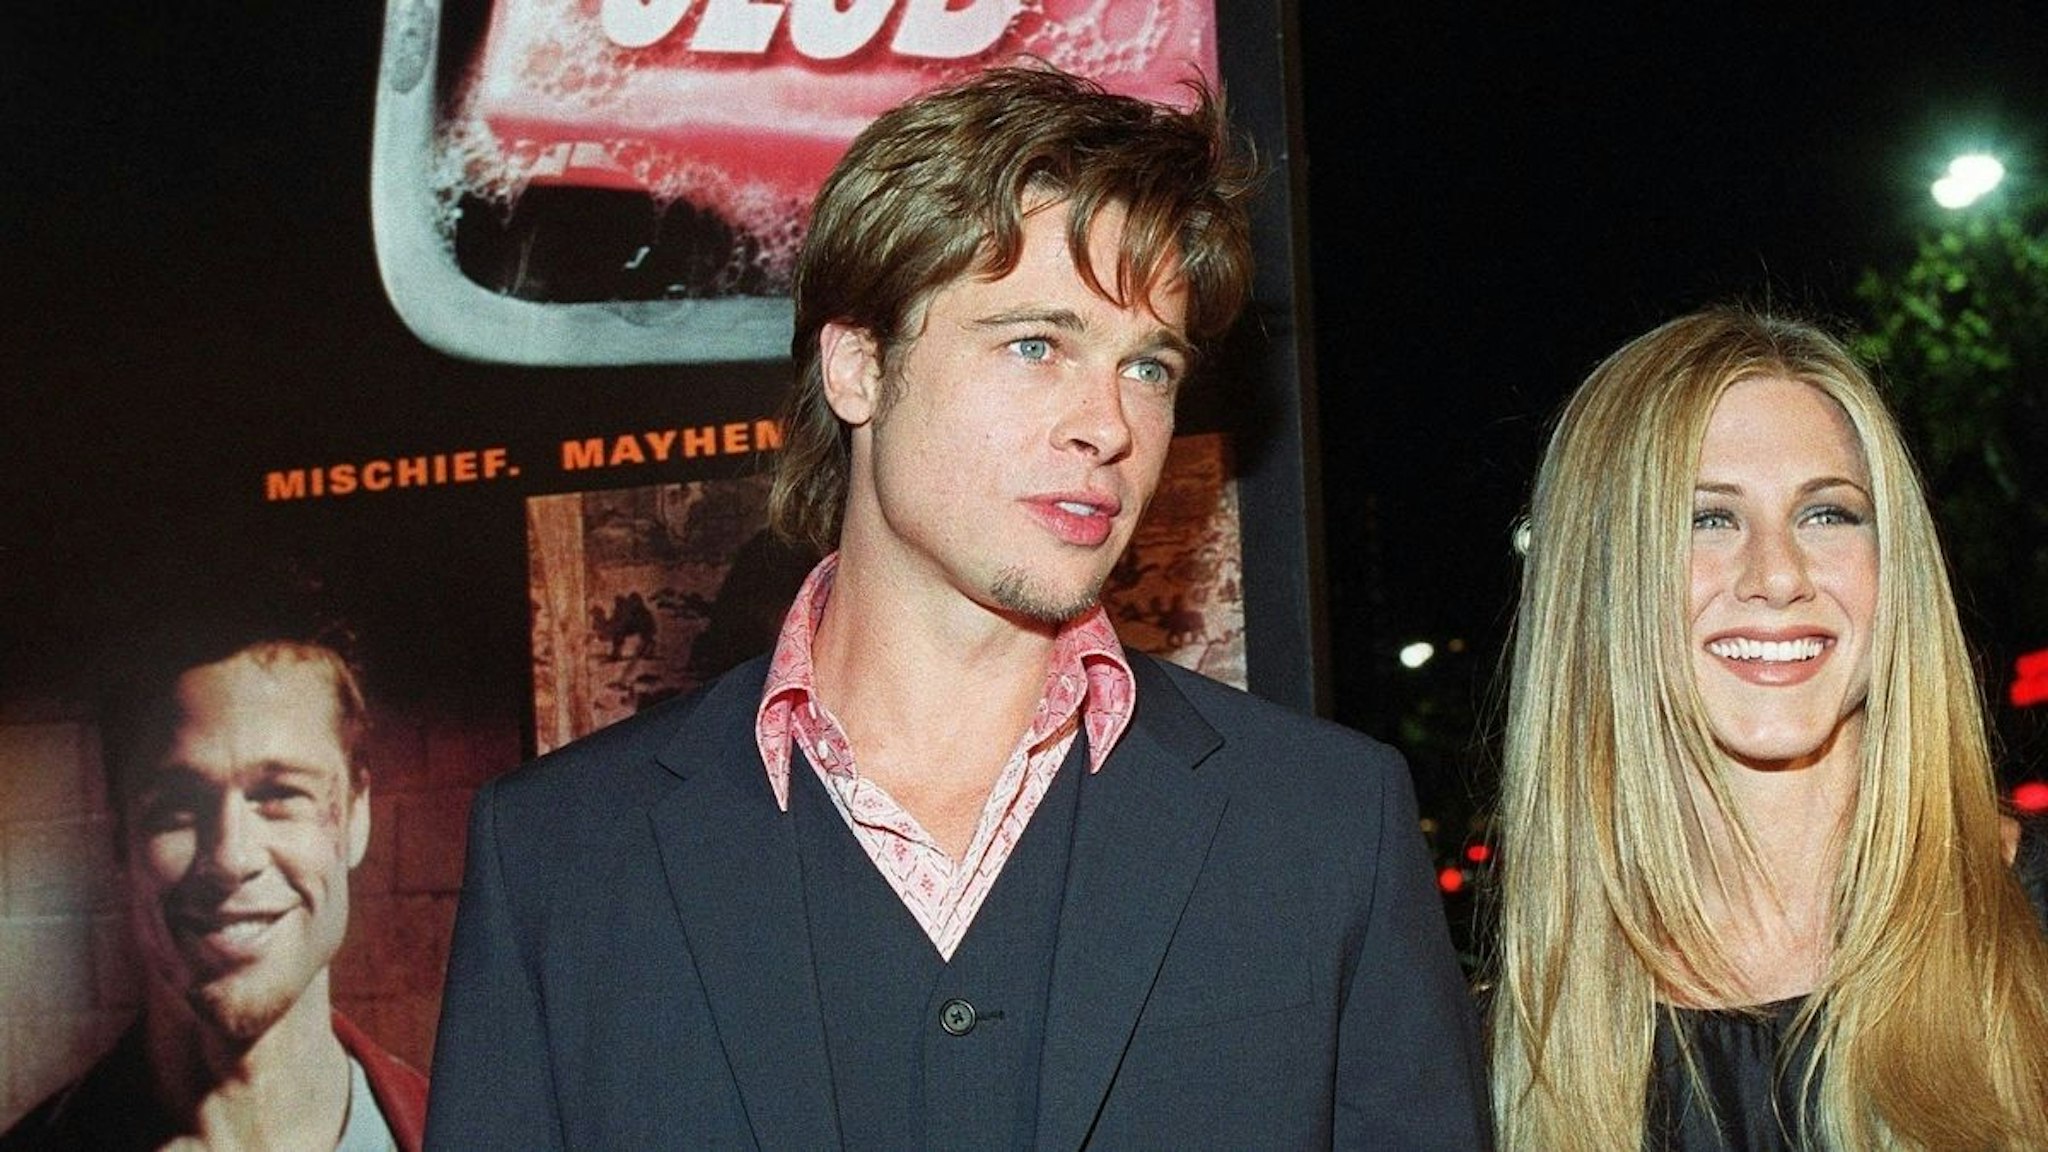 US actor Brad Pitt (L) arrives at the premiere of his new film "Fight Club" with partner Jennifer Aniston (R) in Los Angeles, CA 06 October 1999.